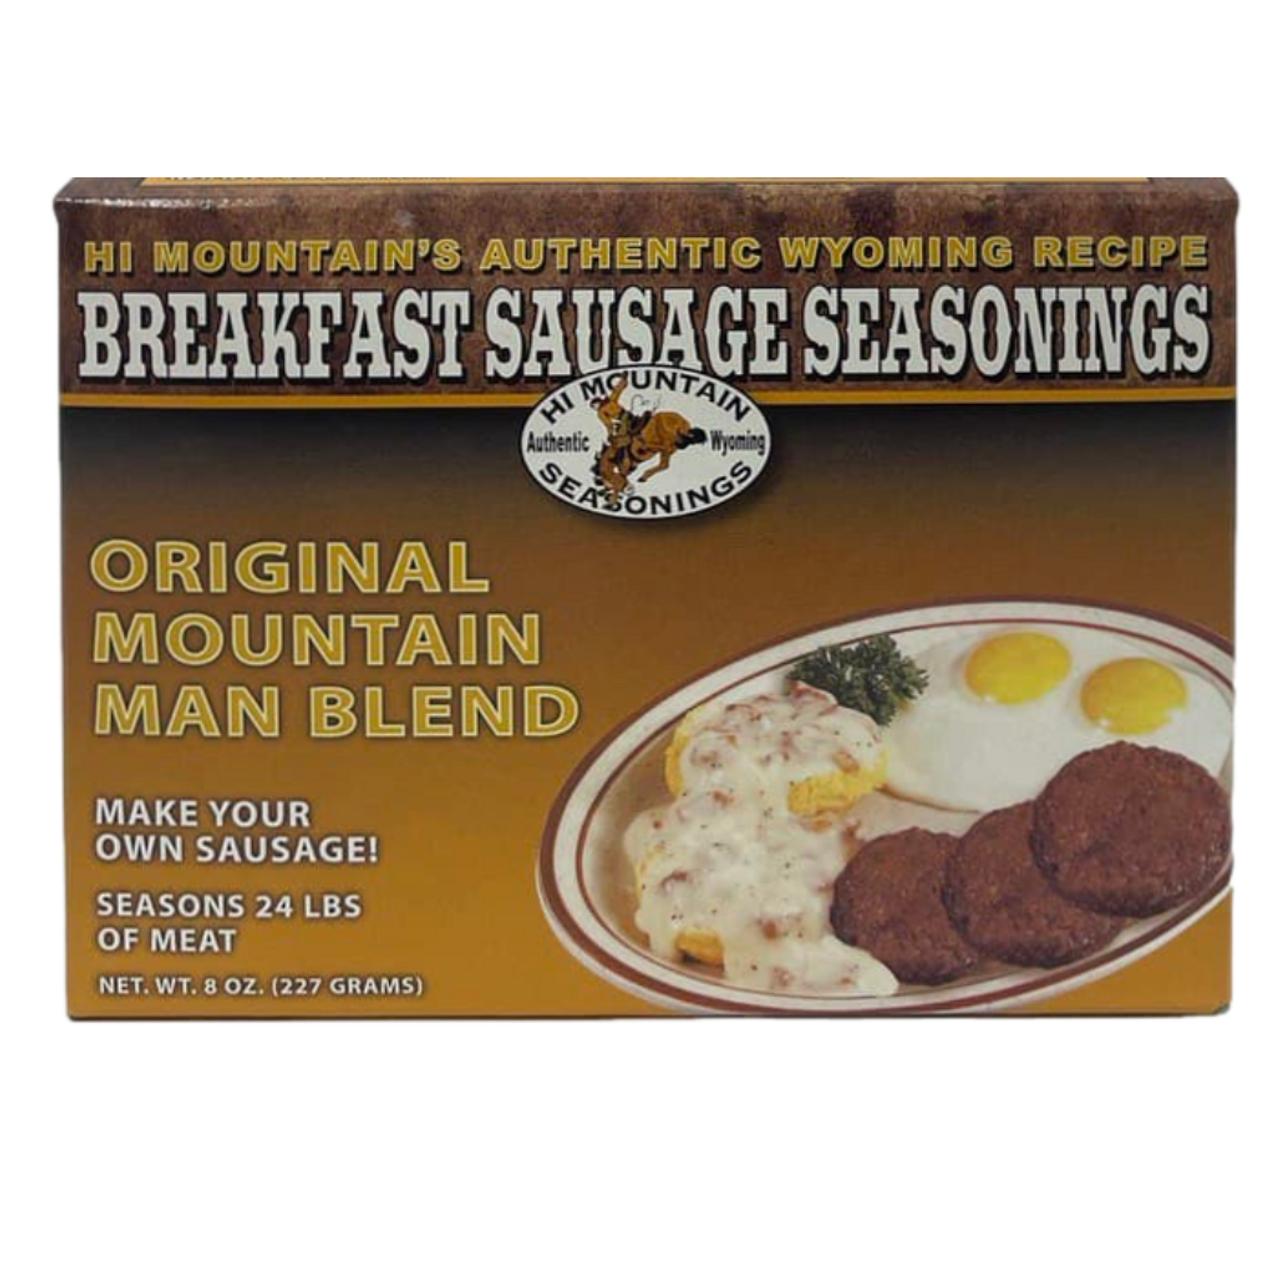 https://cdn11.bigcommerce.com/s-x8y6yj0di0/images/stencil/1280x1280/products/454/984/Hi_Mountain_Breakfast_Sausage_Seasonings_Original_Mountain_Man_Blend_front__28795.1659555872.png?c=1